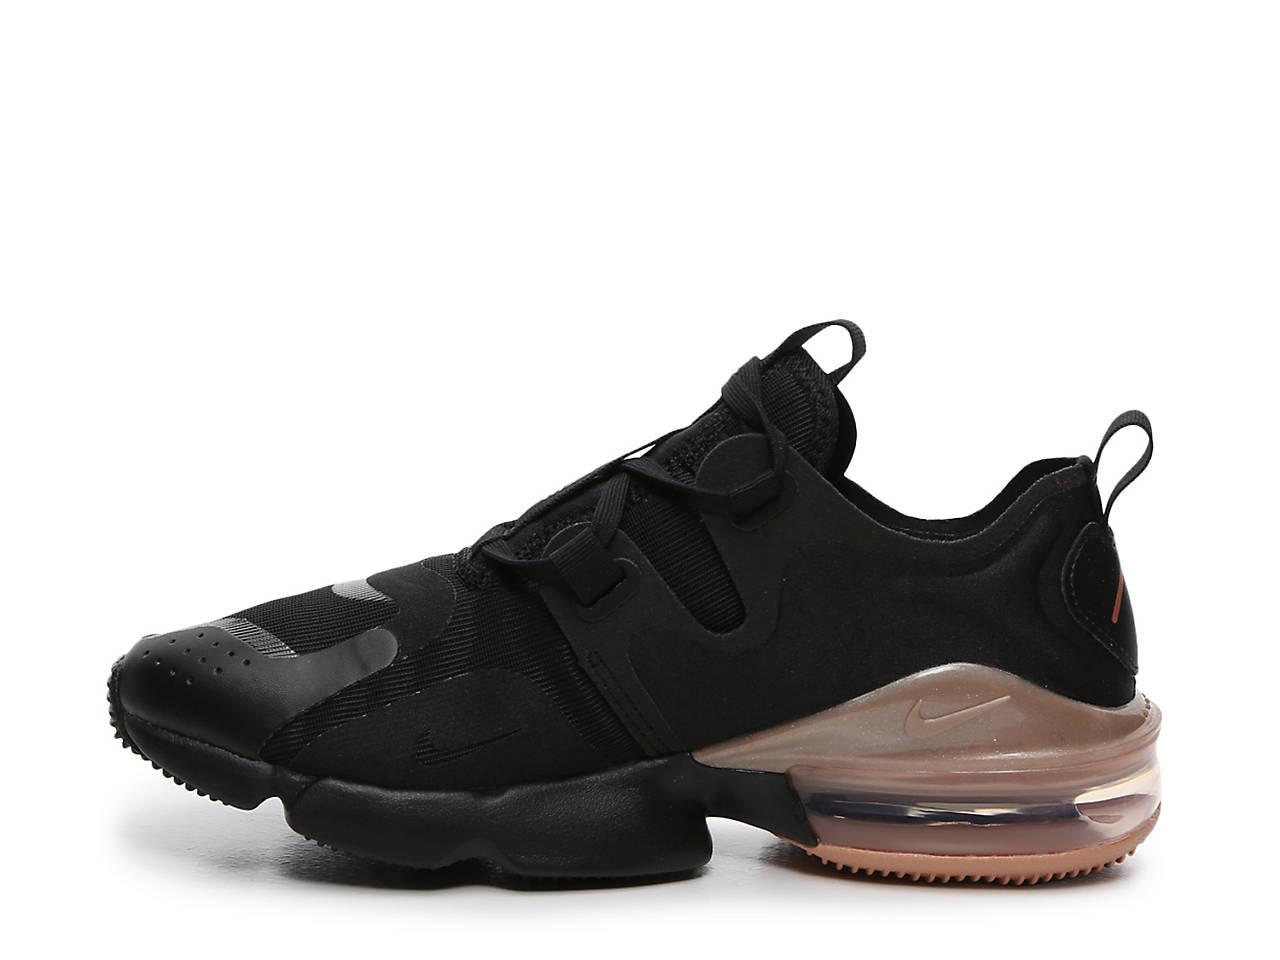 Nike Synthetic Air Max Infinity Sneaker in Black/Rose Gold (Black) - Lyst